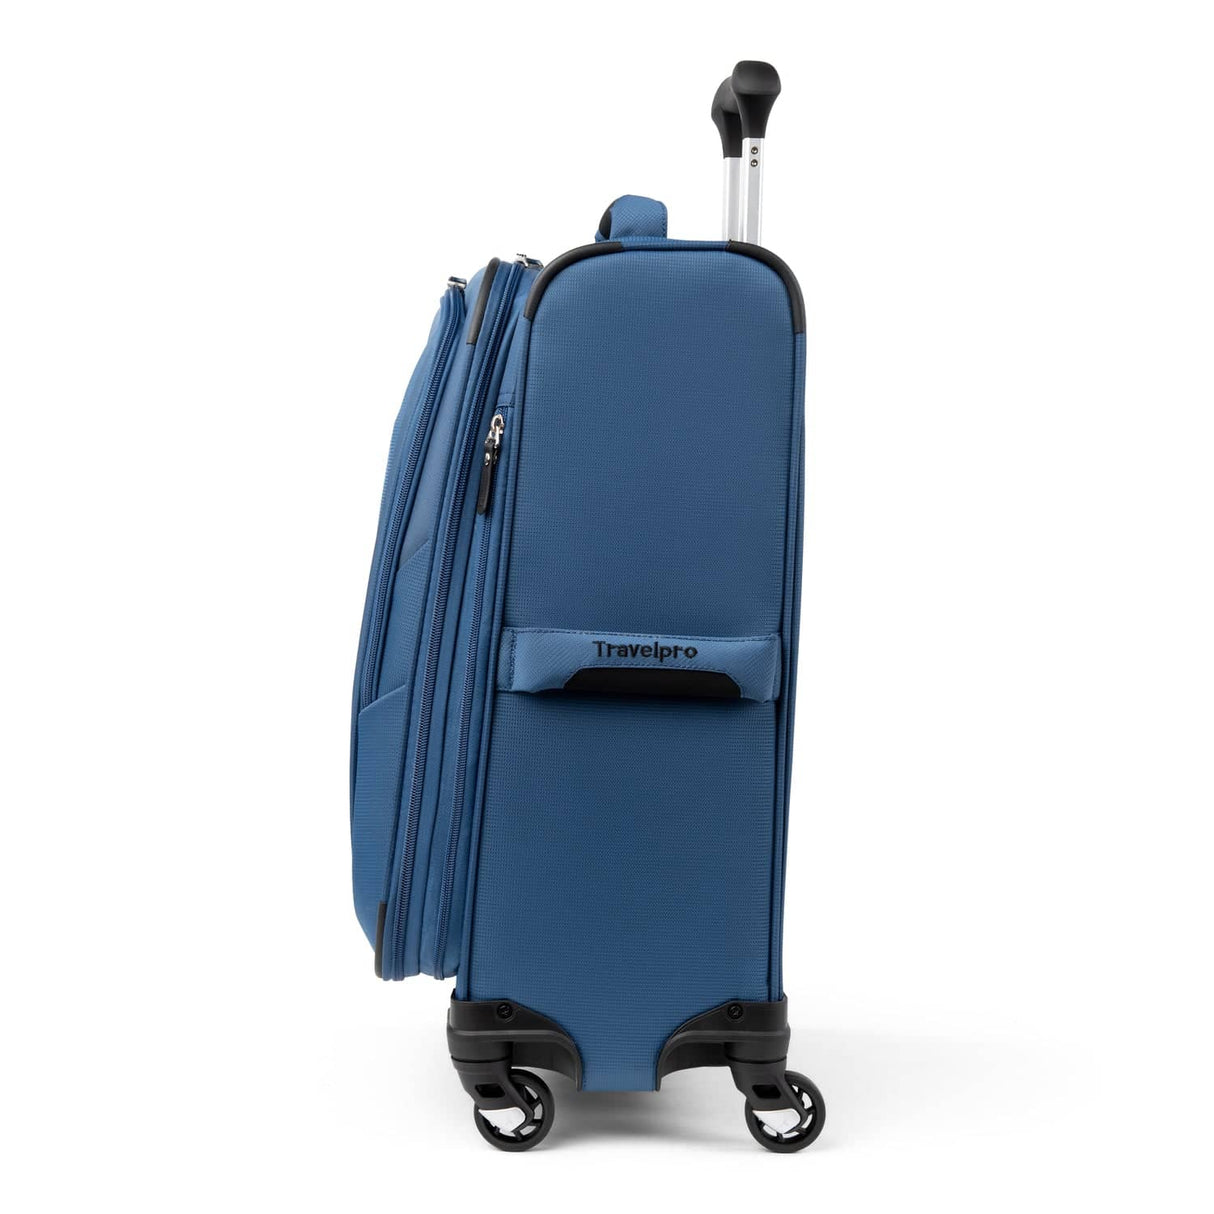 Travelpro Maxlite 5 21" Carry-On Expandable Spinner , , 401176147_side-1500x1500-f3a2c67_1024x1024_2x_7fe3cc5e-c995-4f4f-9e7a-847787a836d4